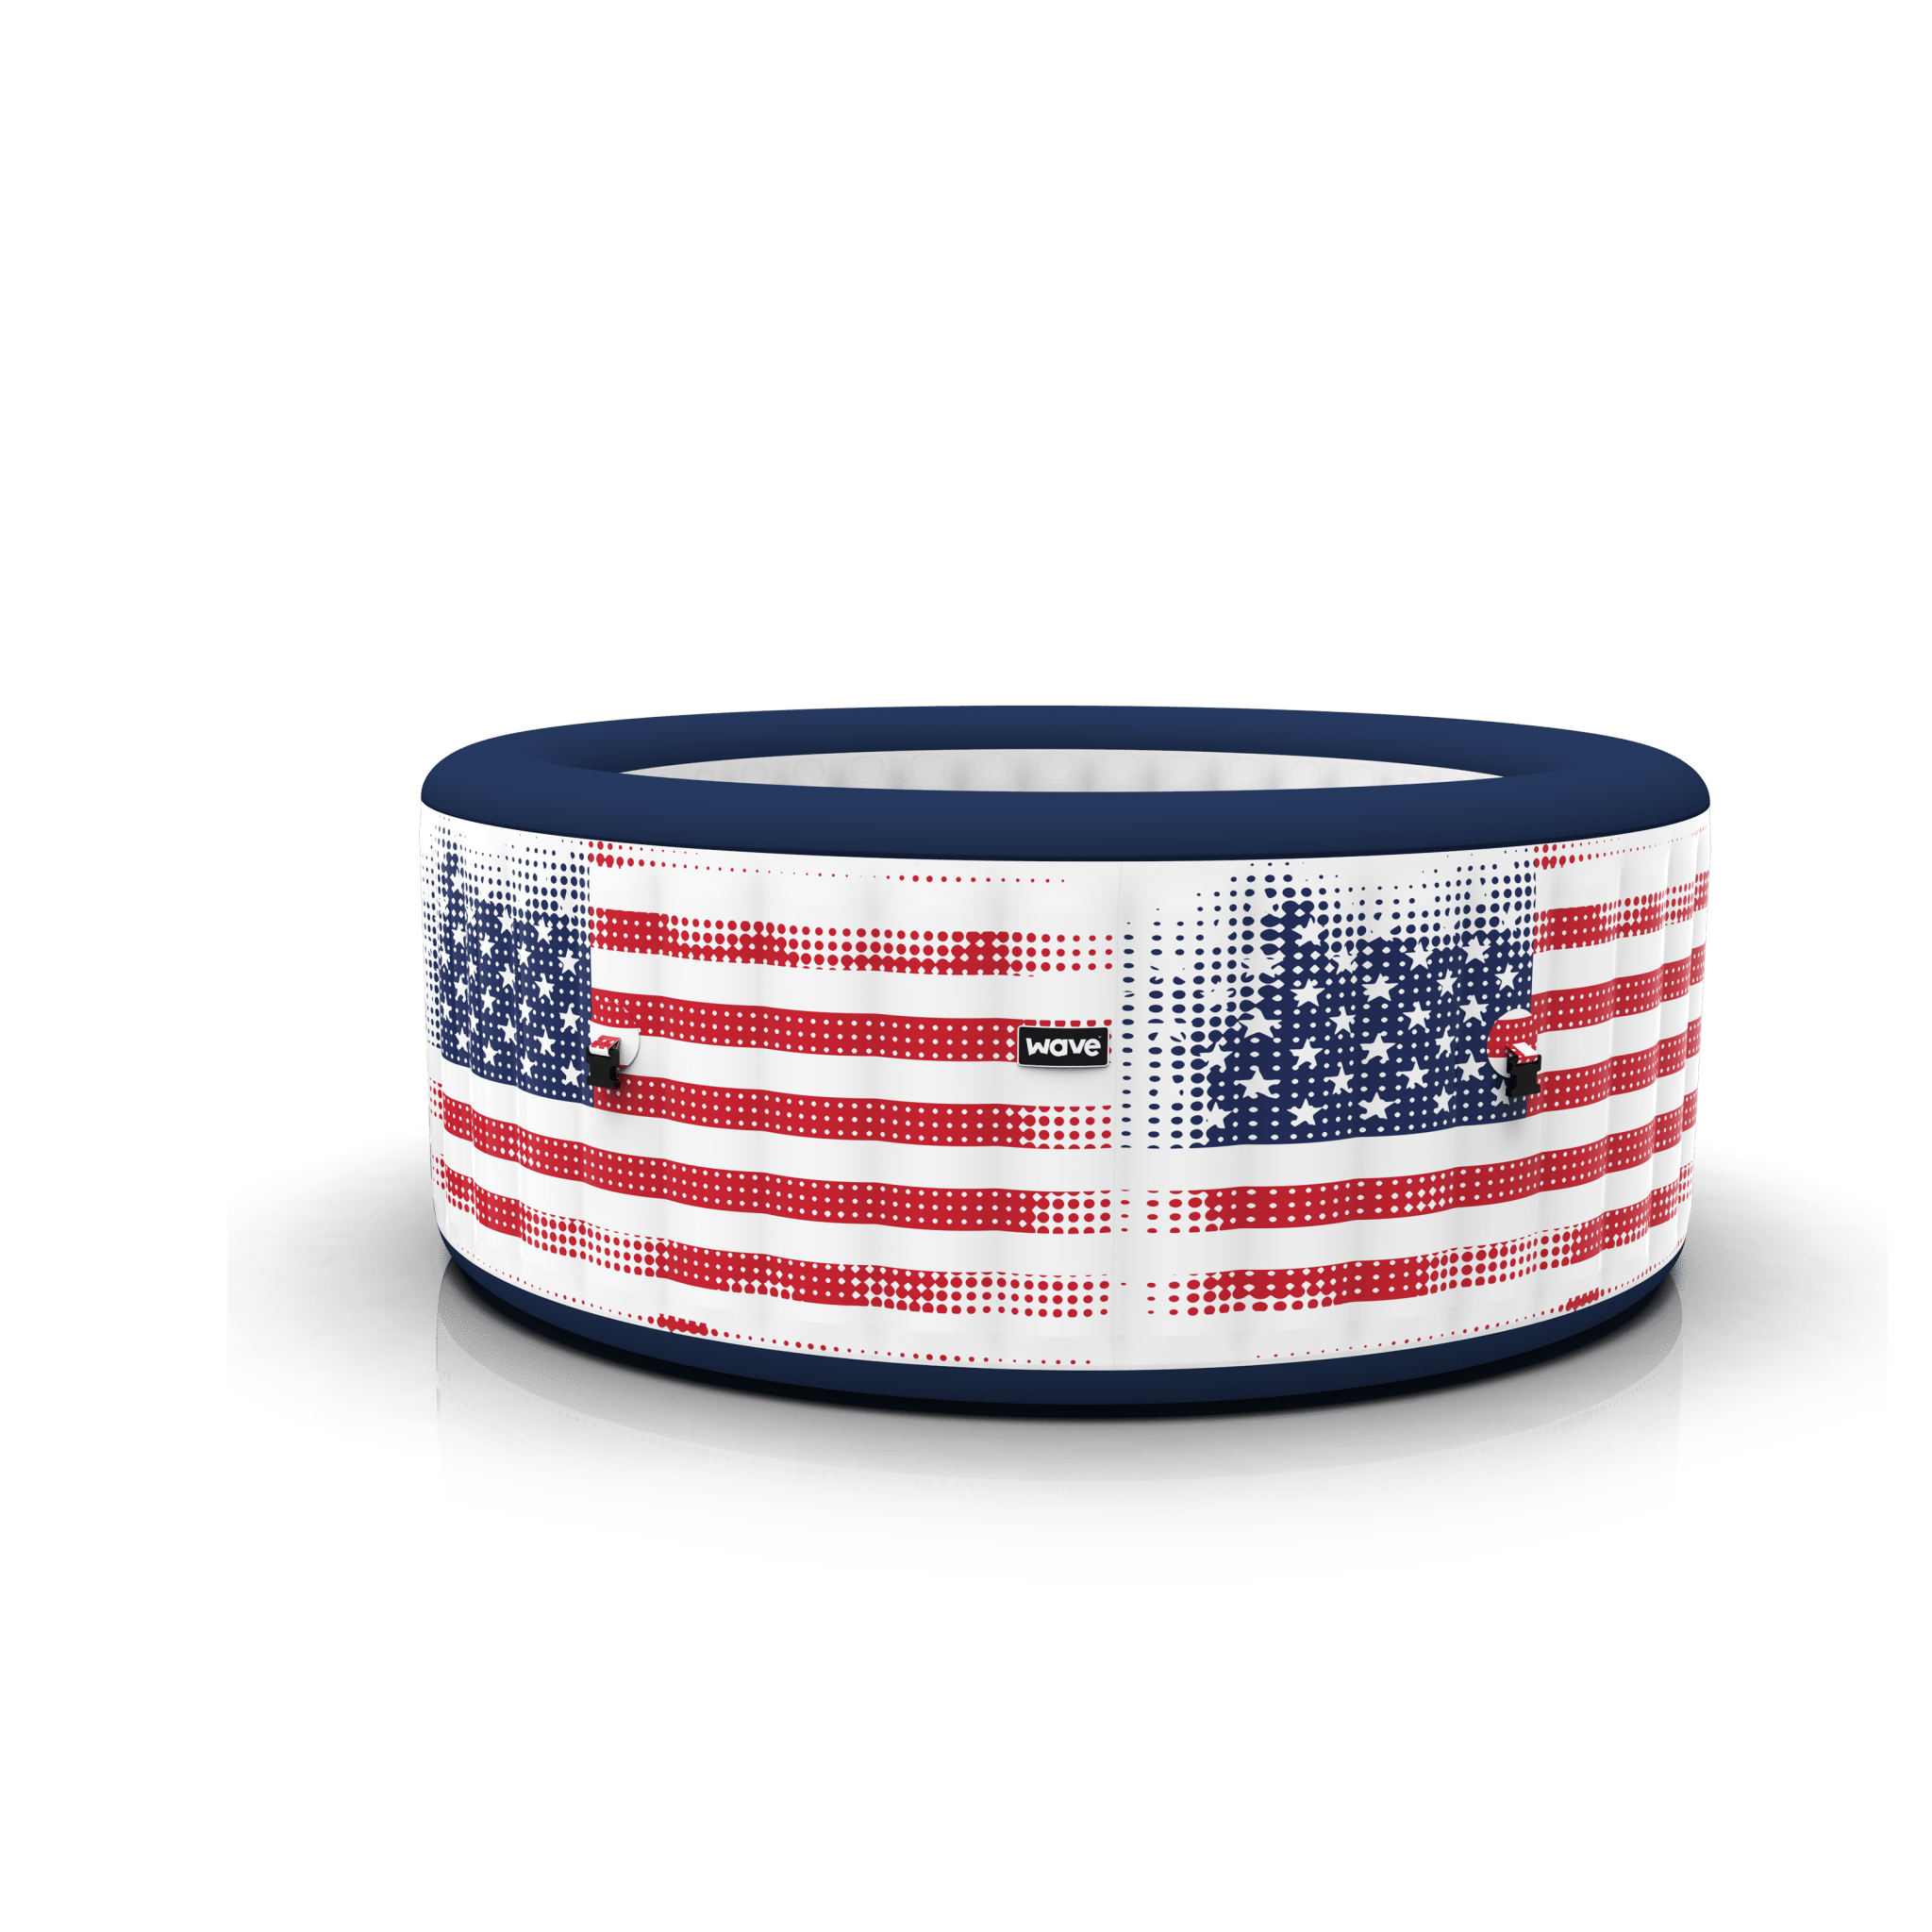 Wave Spa Atlantic 4 Person USA Flag External Liner - Body Replacement - Hot Tub Liner - Wave Spas USA